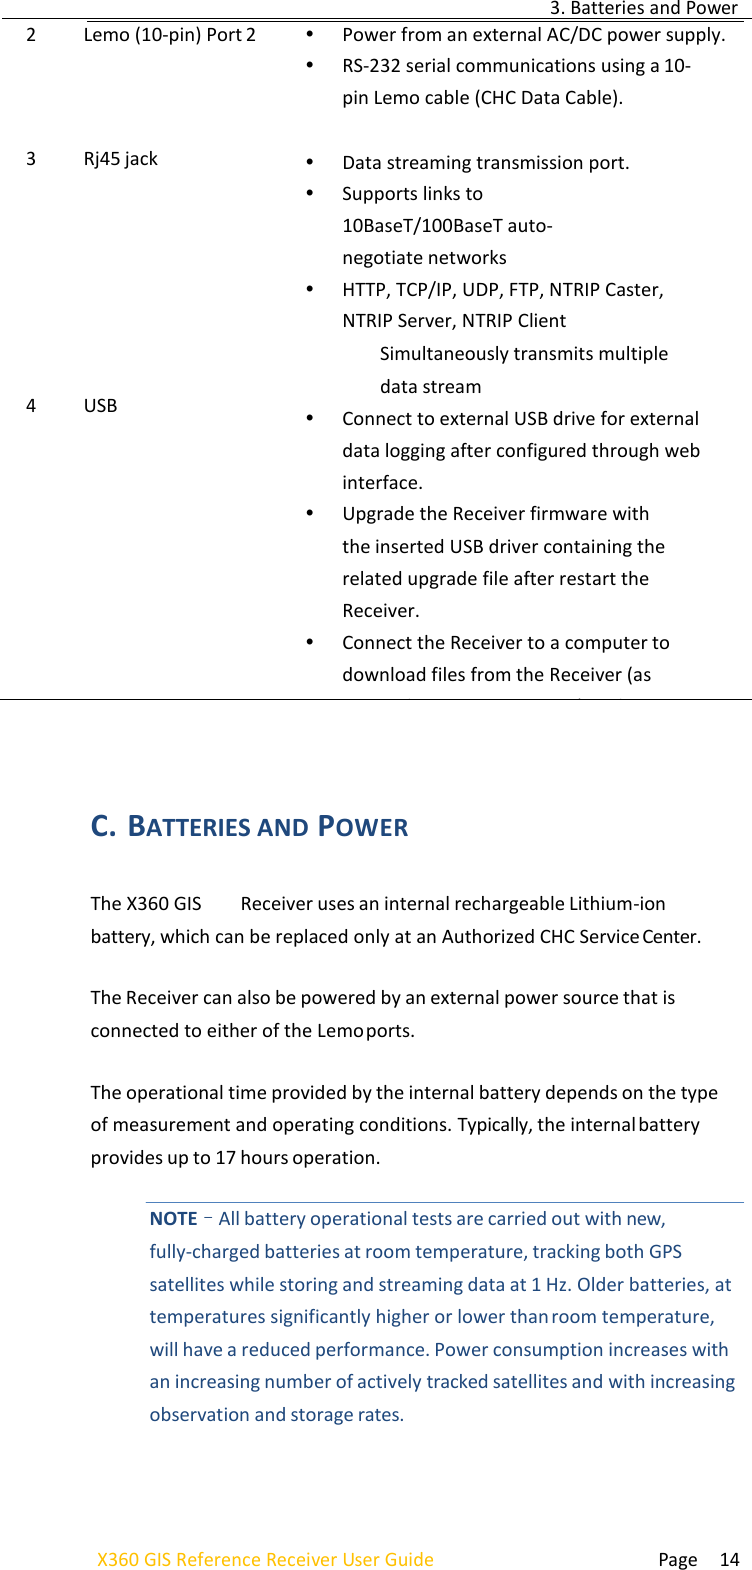 3. Batteries and Power  Page 14 X360 GIS Reference Receiver User Guide   2     3         4 Lemo (10-pin) Port 2     Rj45 jack         USB  Power from an external AC/DC power supply.  RS-232 serial communications using a 10-pin Lemo cable (CHC Data Cable).   Data streaming transmission port.  Supports links to 10BaseT/100BaseT auto-negotiate networks  HTTP, TCP/IP, UDP, FTP, NTRIP Caster, NTRIP Server, NTRIP Client Simultaneously transmits multiple data stream  Connect to external USB drive for external data logging after configured through web interface.  Upgrade the Receiver firmware with the inserted USB driver containing the related upgrade file after restart the Receiver.  Connect the Receiver to a computer to download files from the Receiver (as external storage equipment) to the computer .     C. BATTERIES AND POWER  The X360 GIS  Receiver uses an internal rechargeable Lithium-ion battery, which can be replaced only at an Authorized CHC Service Center.  The Receiver can also be powered by an external power source that is connected to either of the Lemo ports.  The operational time provided by the internal battery depends on the type of measurement and operating conditions. Typically, the internal battery provides up to 17 hours operation.   NOTE–All battery operational tests are carried out with new, fully-charged batteries at room temperature, tracking both GPS satellites while storing and streaming data at 1 Hz. Older batteries, at temperatures significantly higher or lower than room temperature, will have a reduced performance. Power consumption increases with an increasing number of actively tracked satellites and with increasing observation and storage rates. 